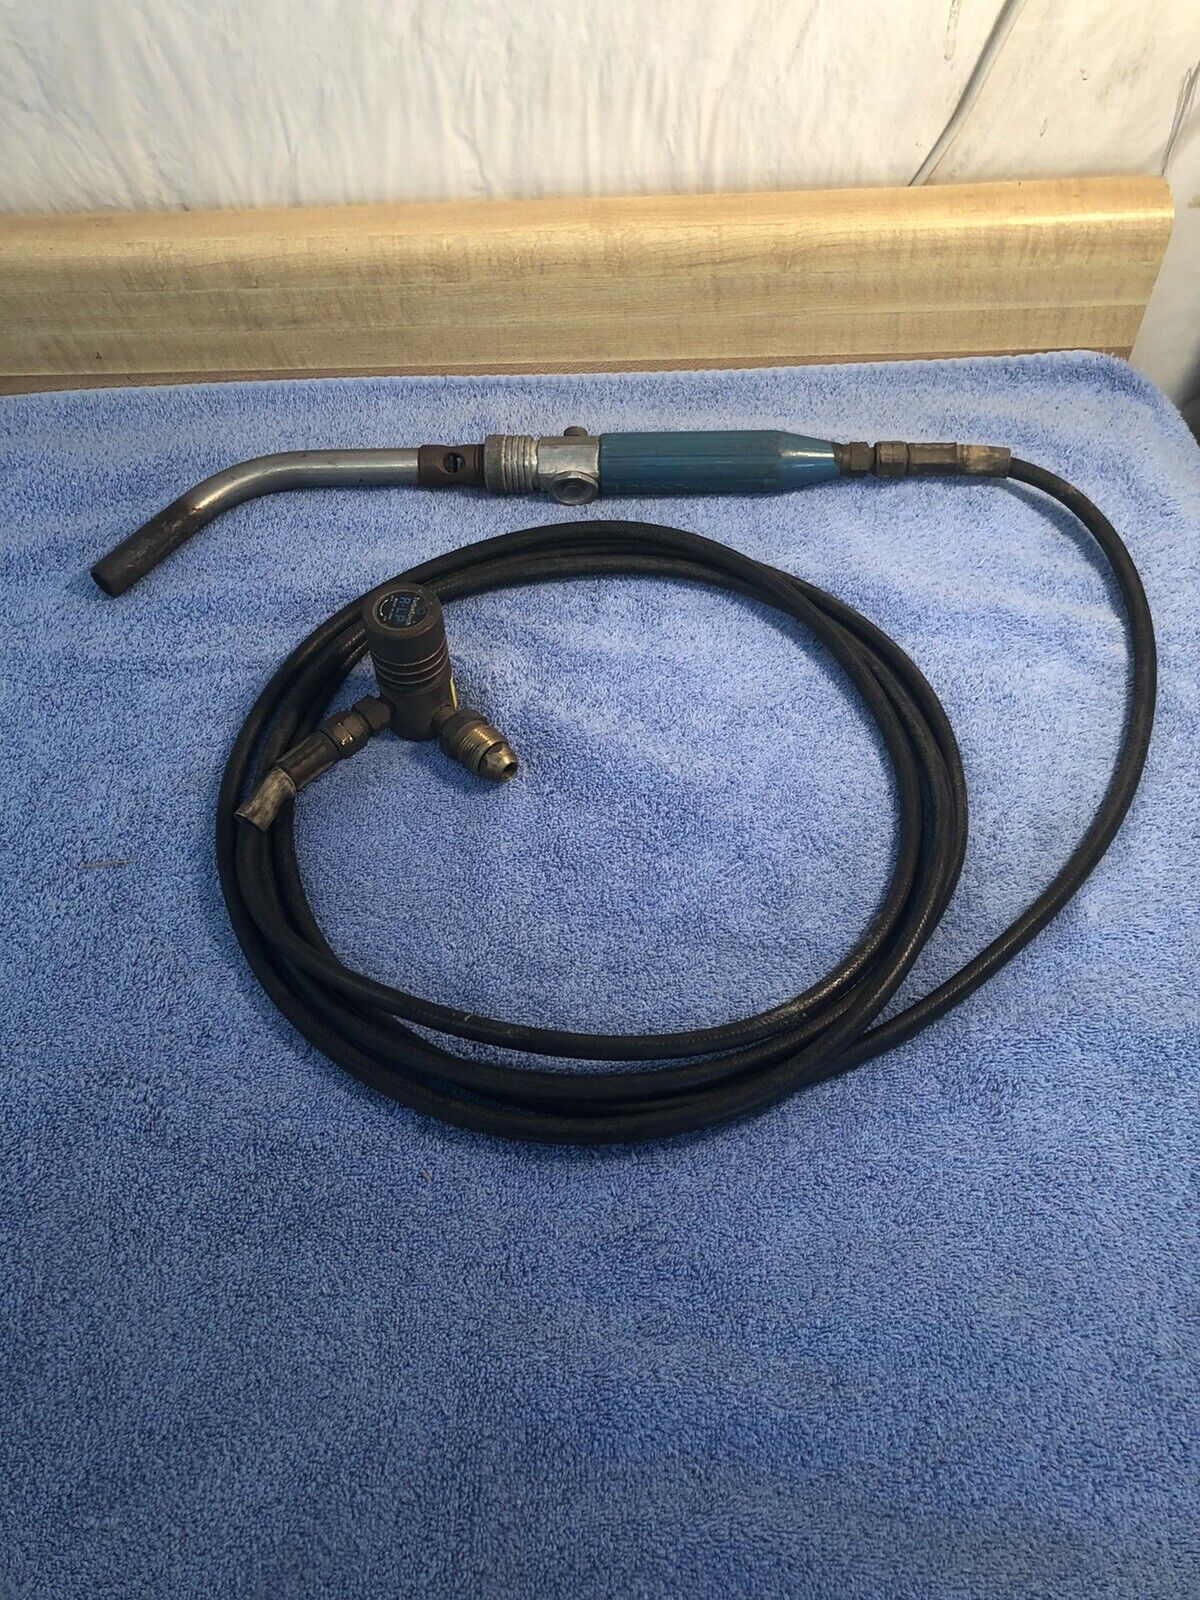 TurboTorch Mapp Gas Torch and Hose